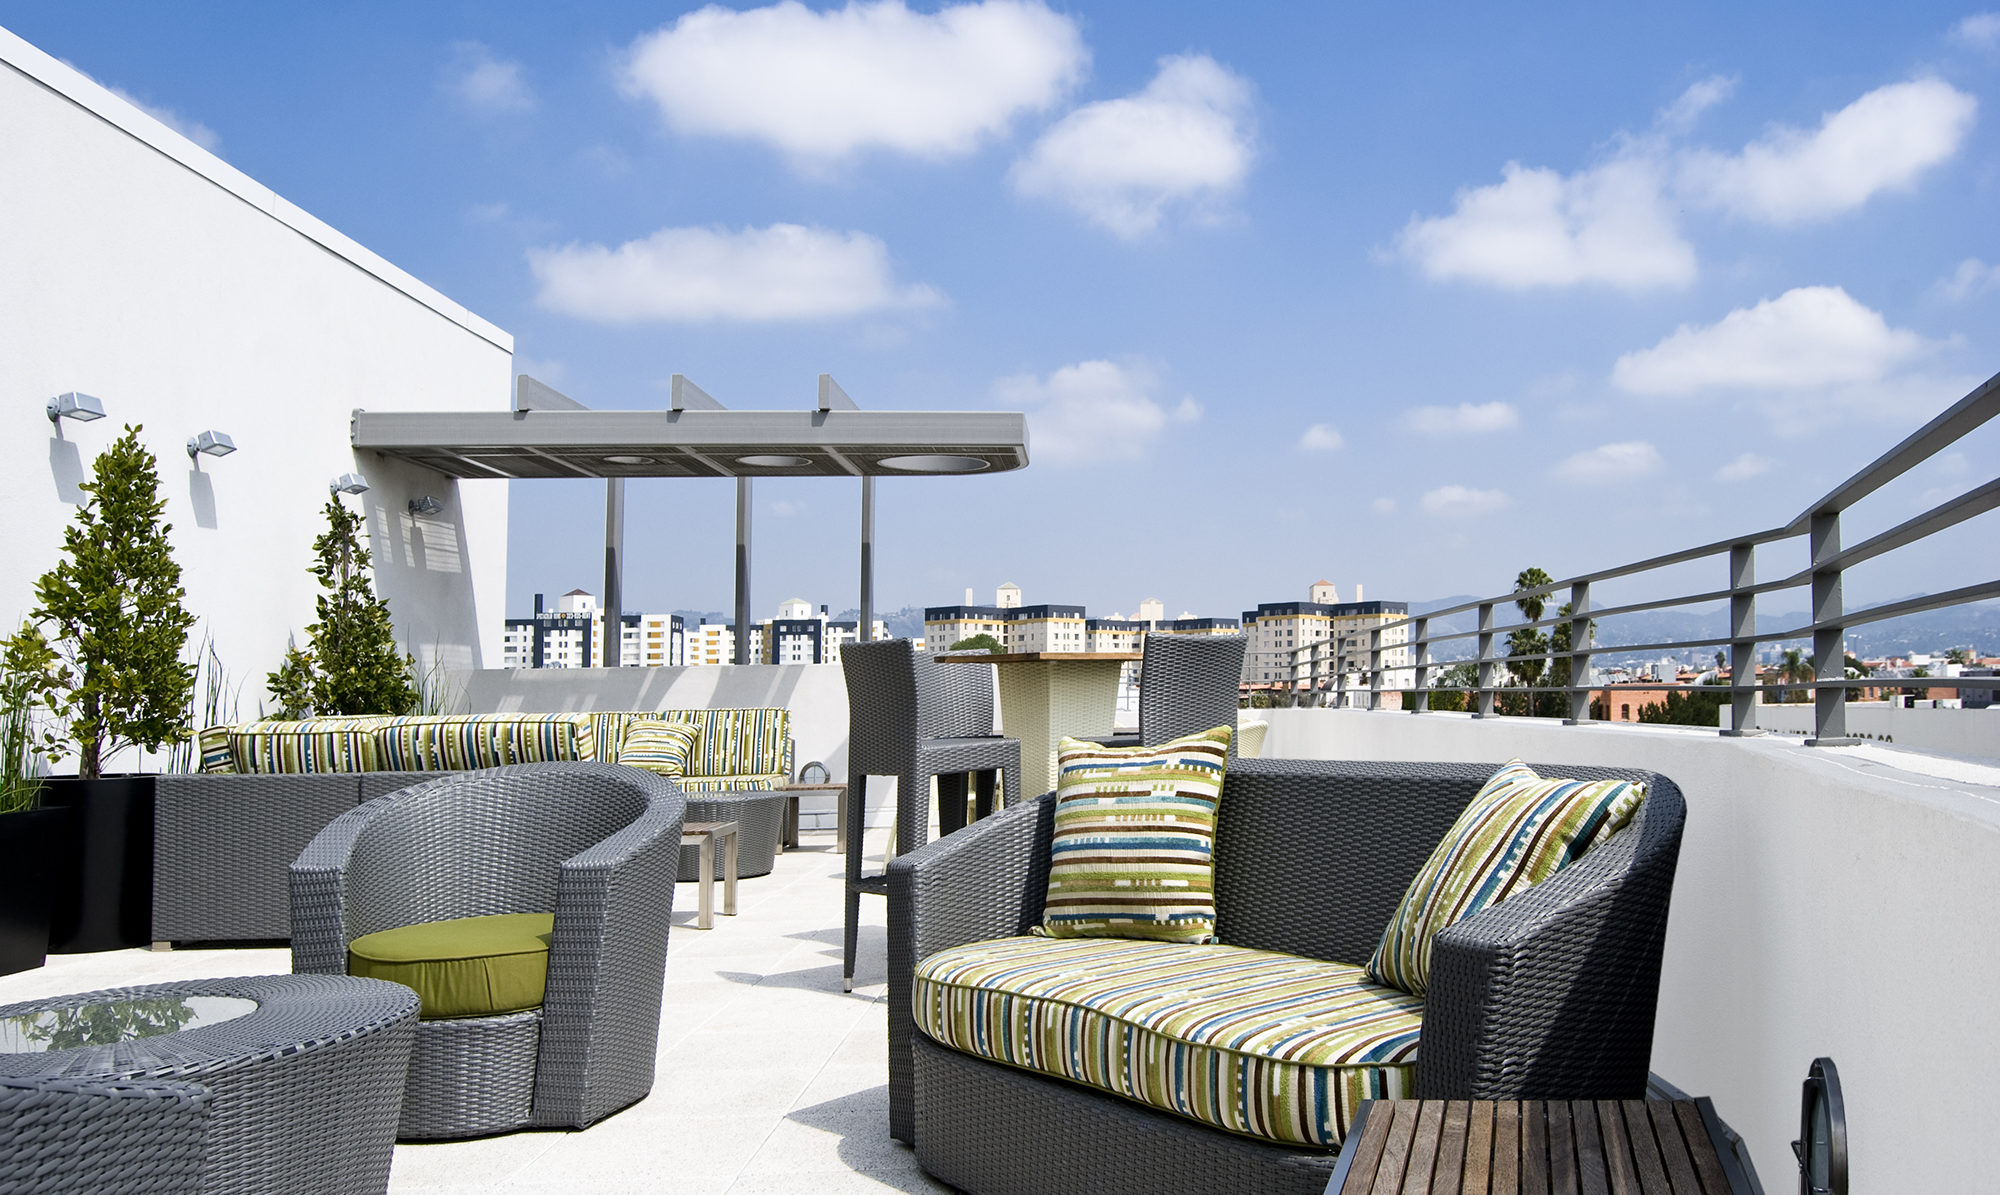 Sky deck with lounging areas